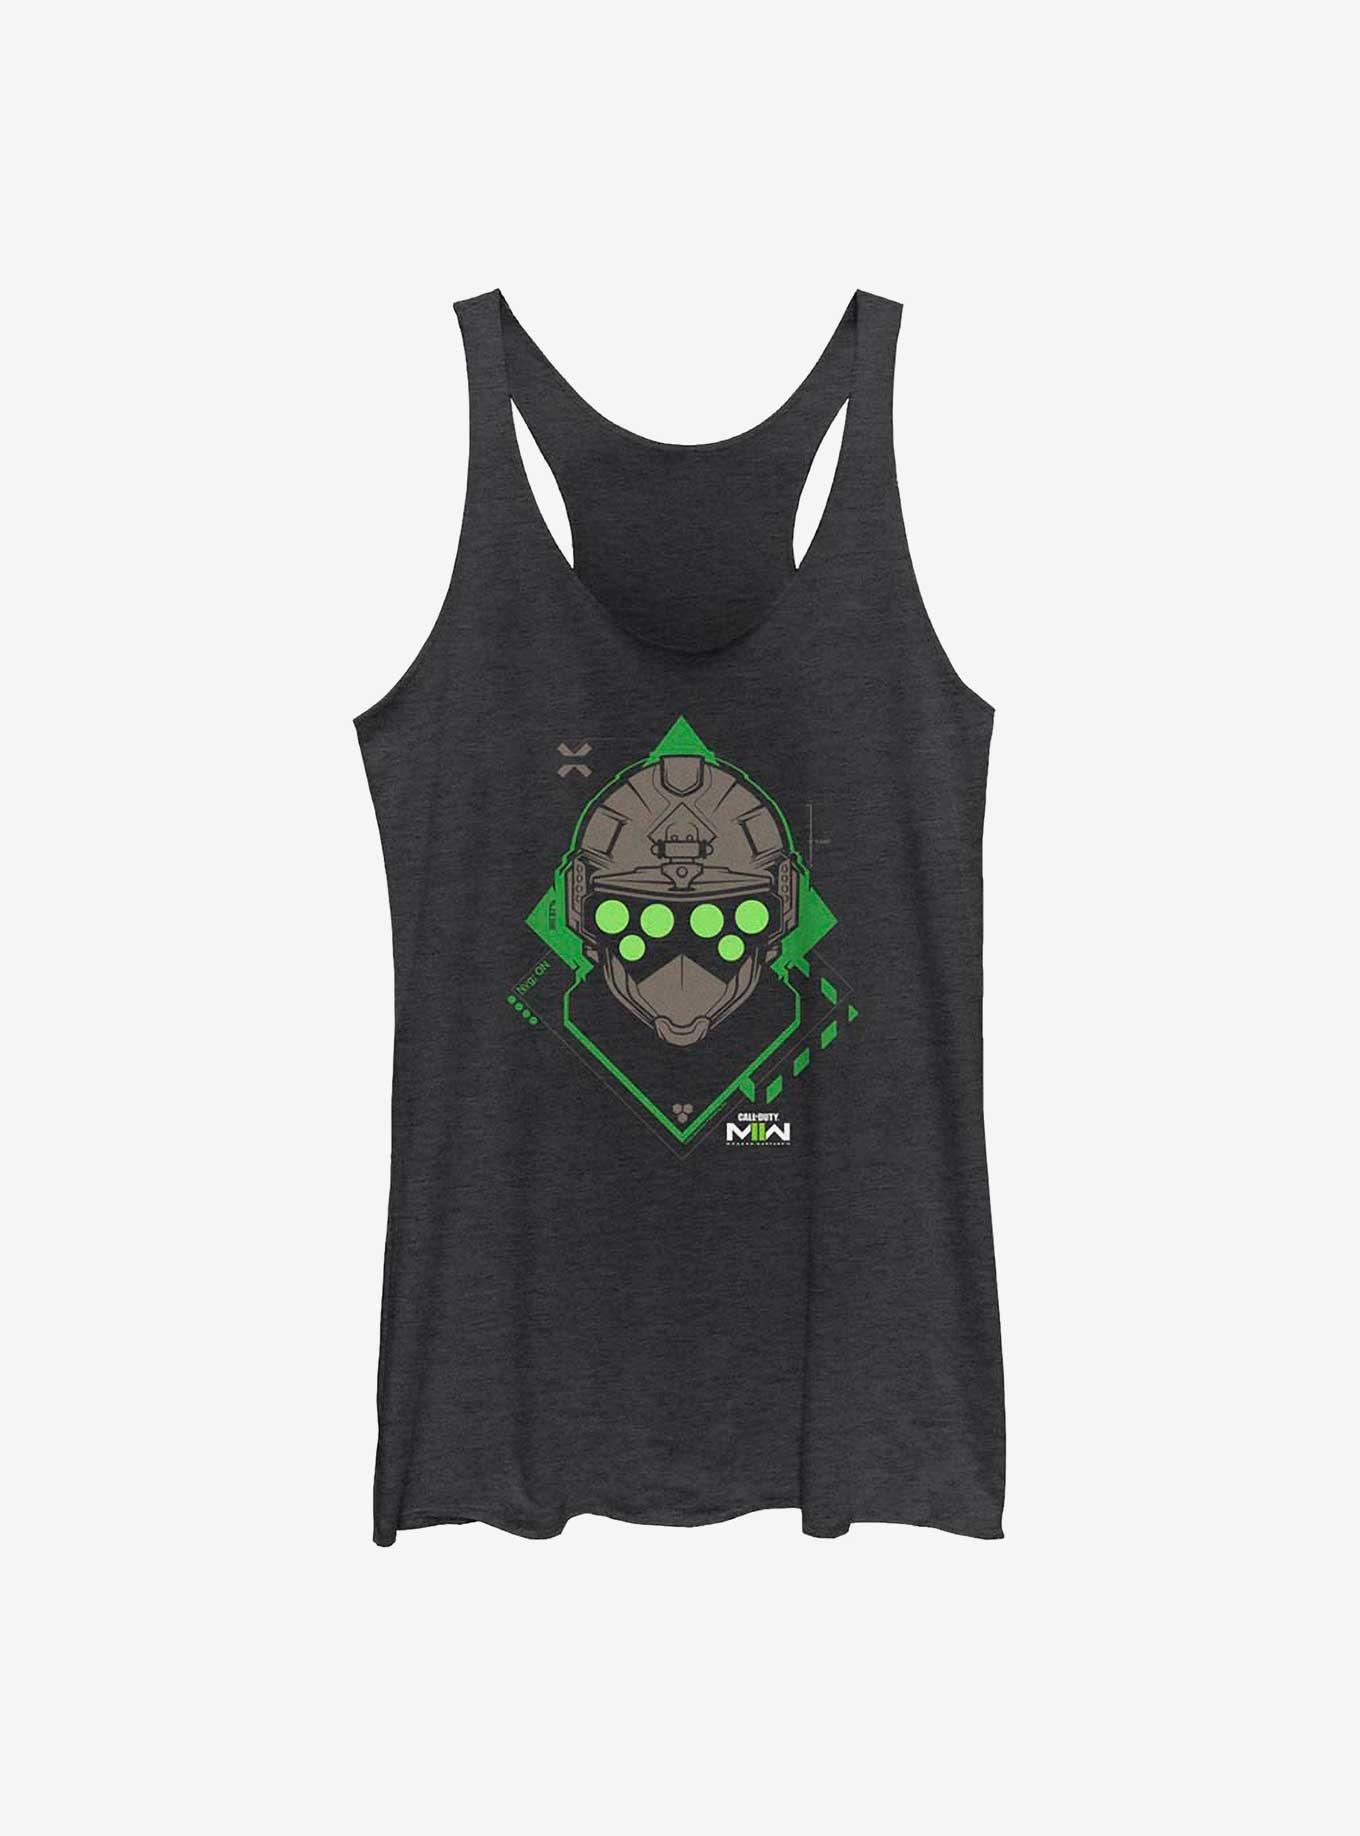 Call Of Duty Night Vision On Girls Raw Edge Tank, BLK HTR, hi-res